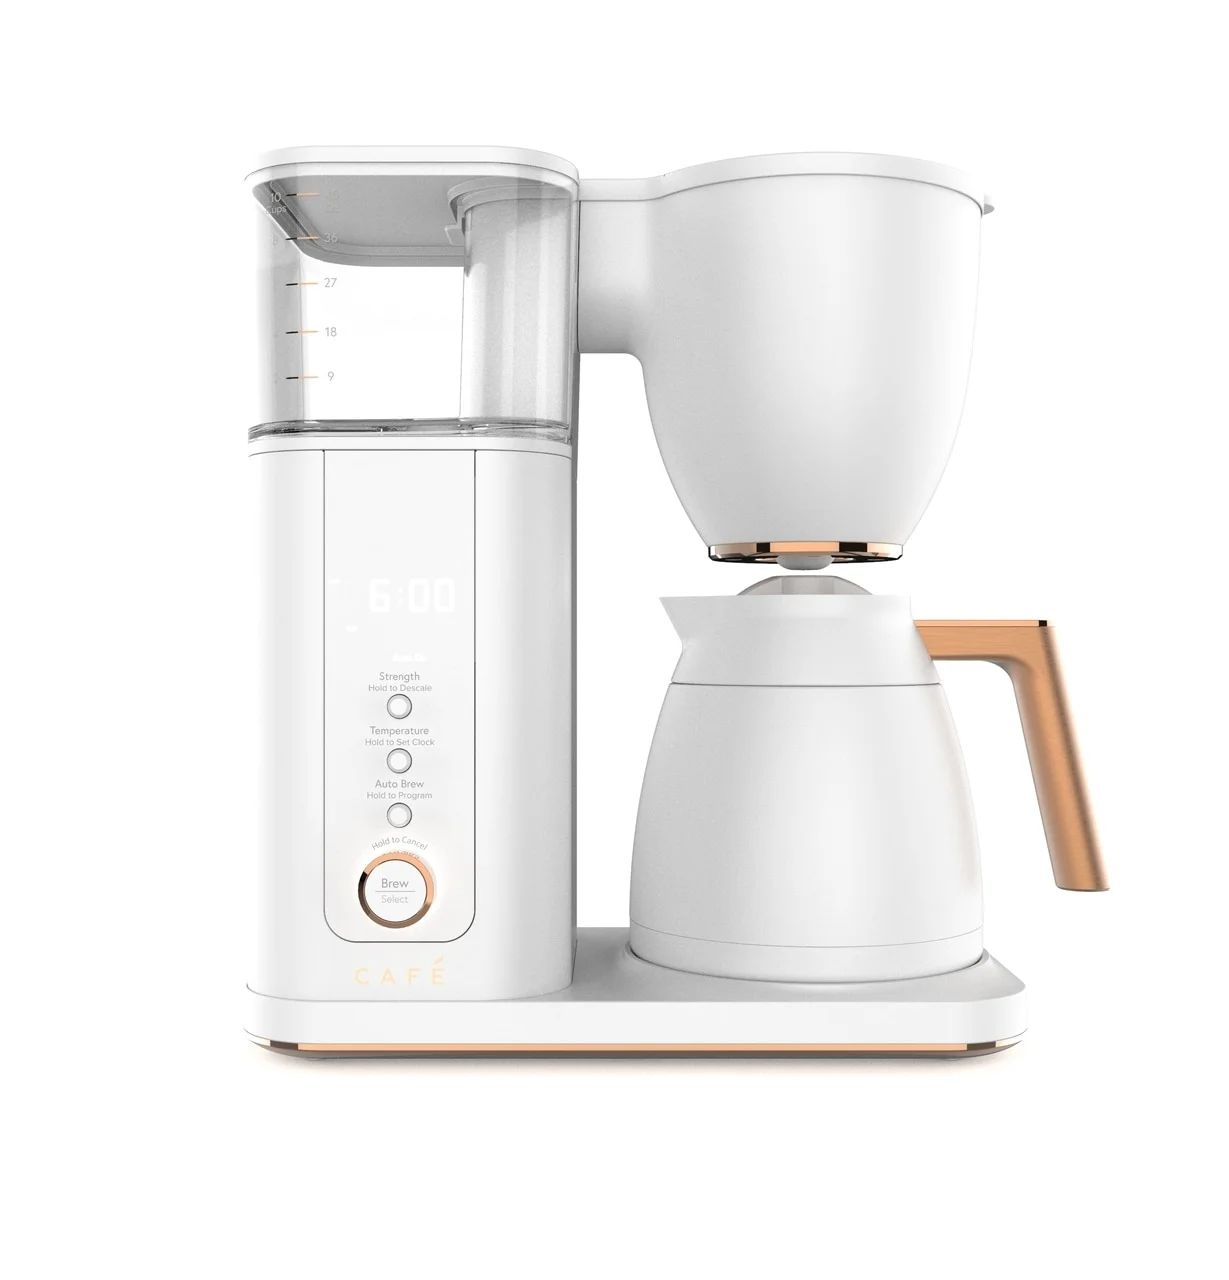 Café Specialty Drip Coffee Maker with Thermal Carafe | Wayfair North America